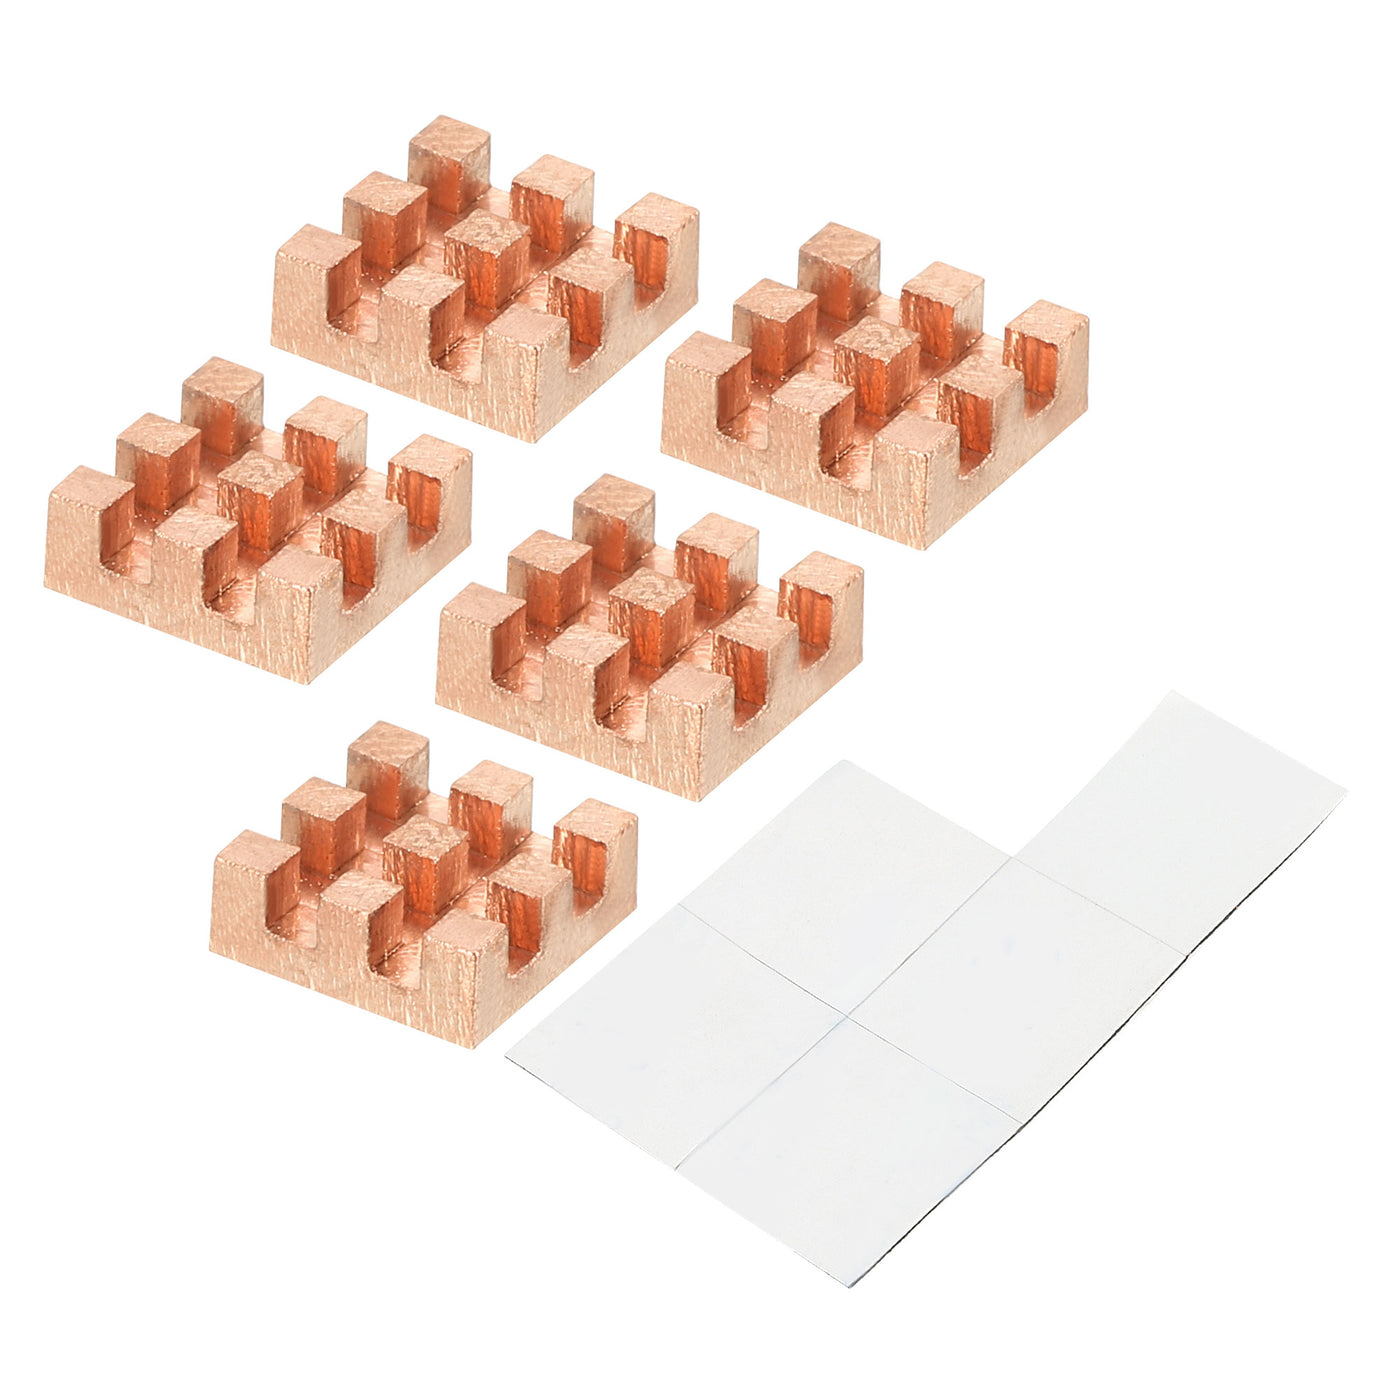 Harfington Copper Heatsink 8x8x3mm with Self Adhesive for IC Chipset Cooler 5pcs